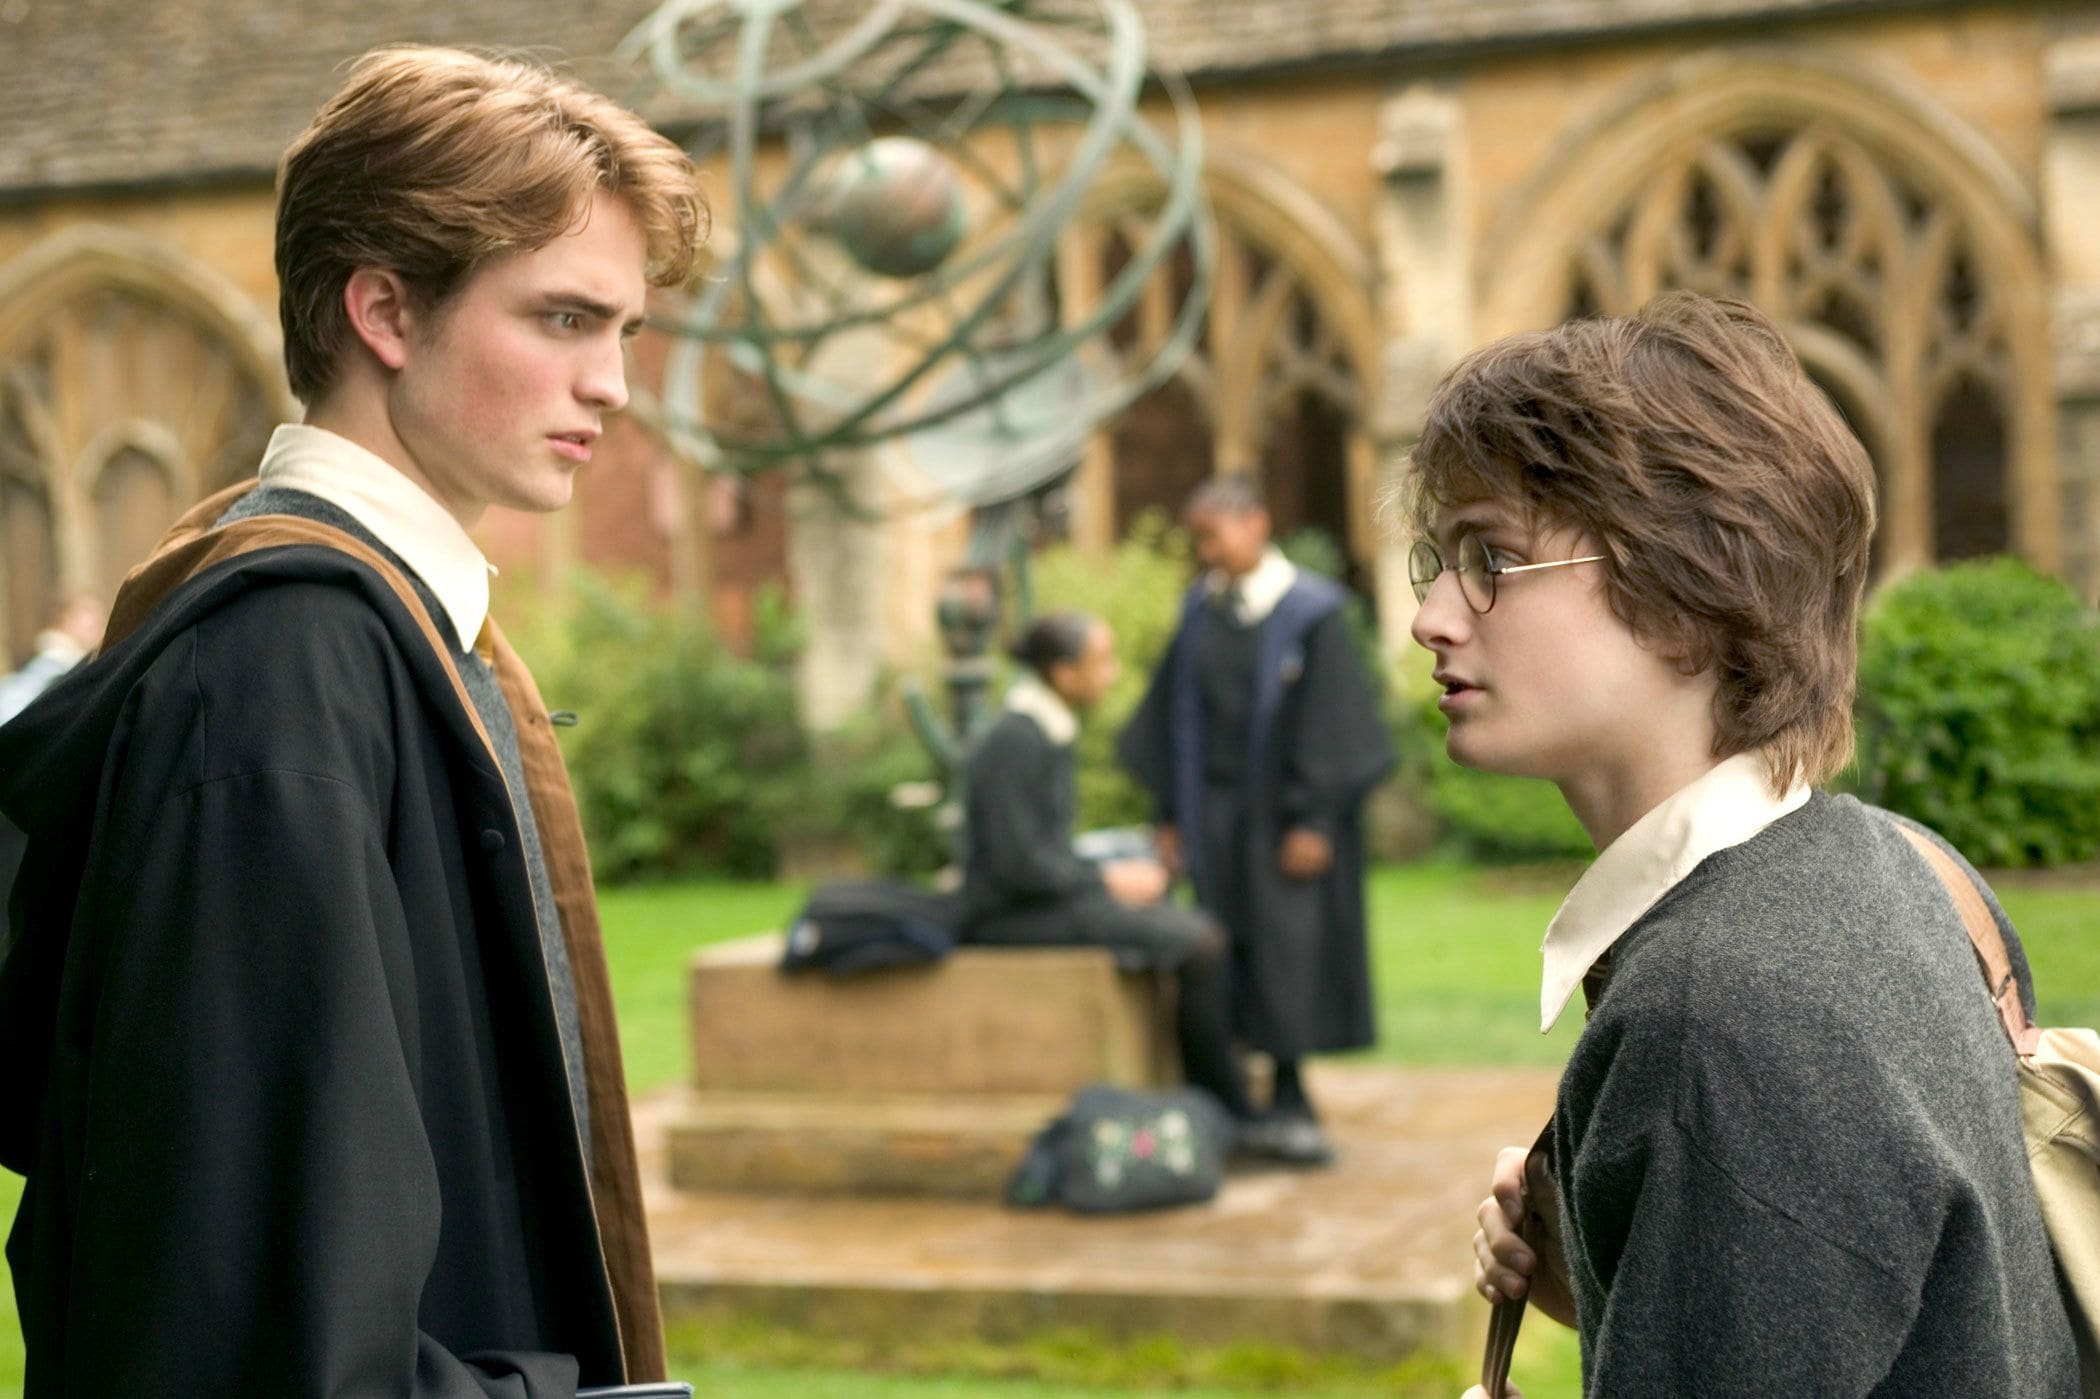 Who played the character of Cedric Diggory in the Harry Potter films? 2